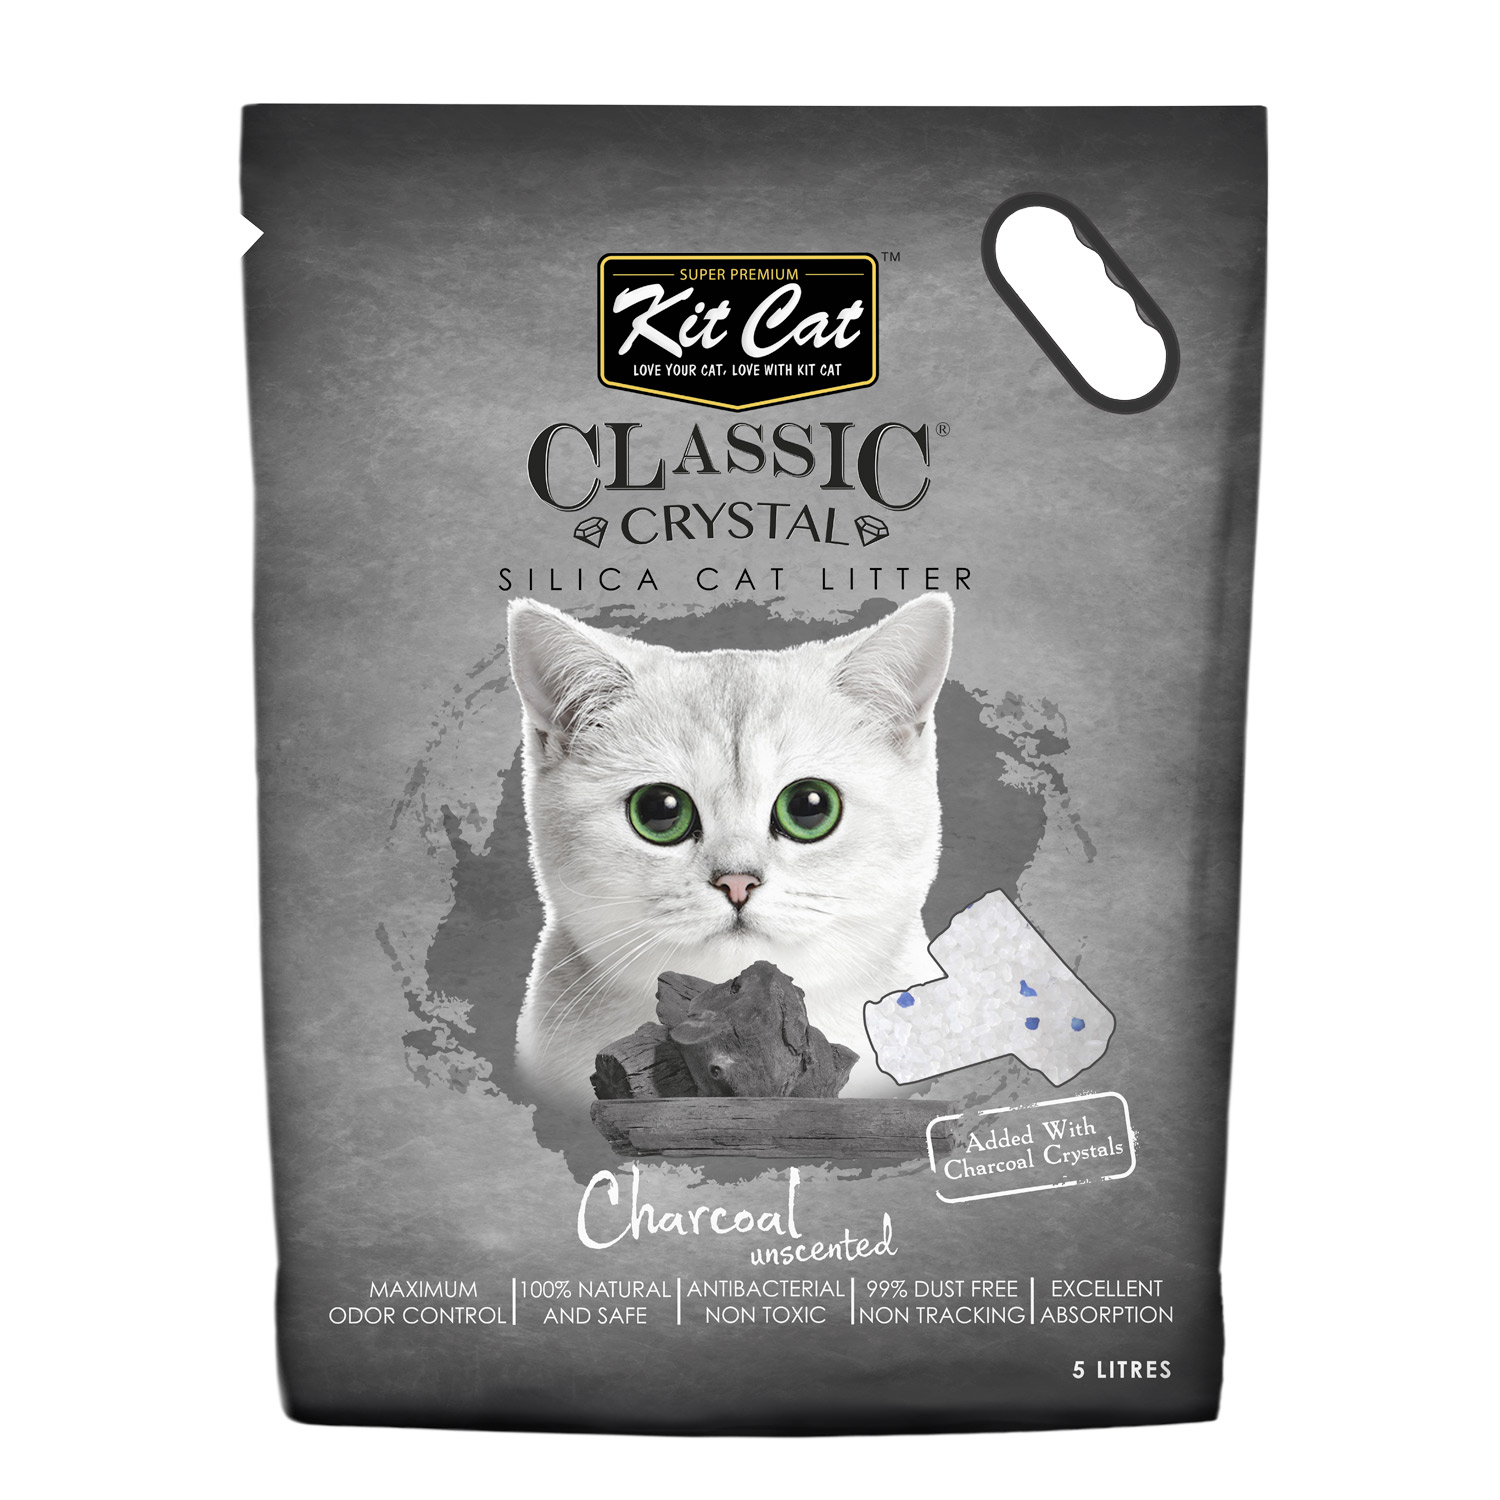 Kit Cat Classic Crystal Cat Litter – Charcoal Unscented (5 Litres)